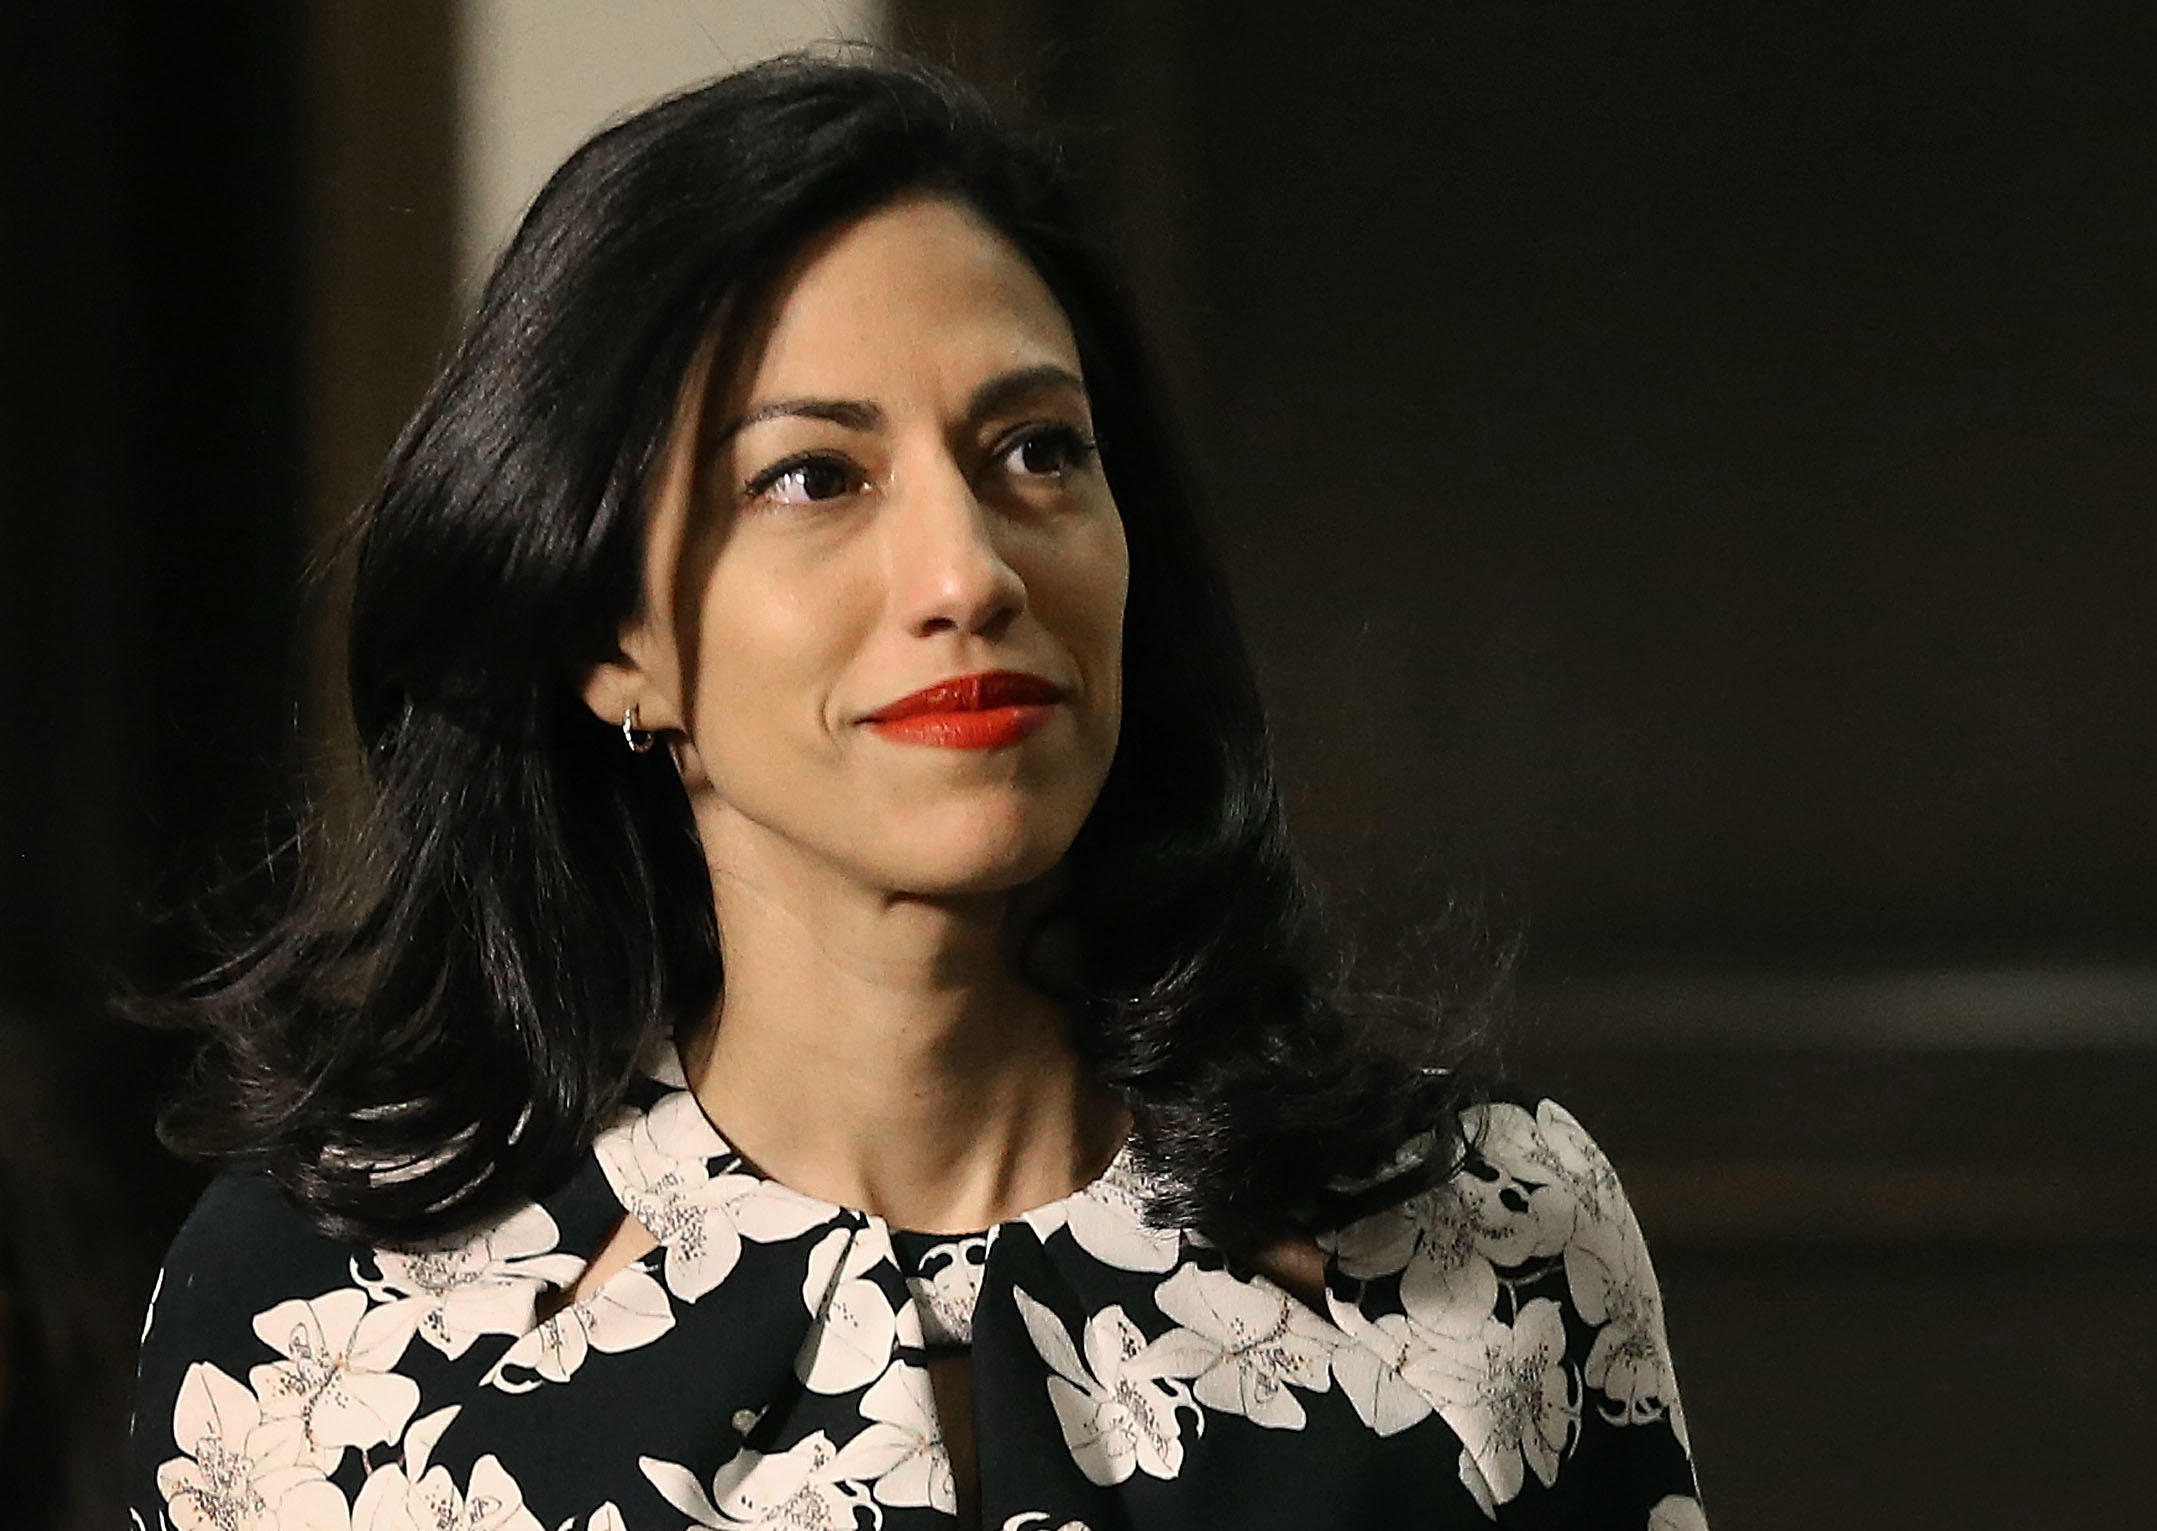 Huma Abedin, Anthony Weiner separation brewing for a while - CBS News